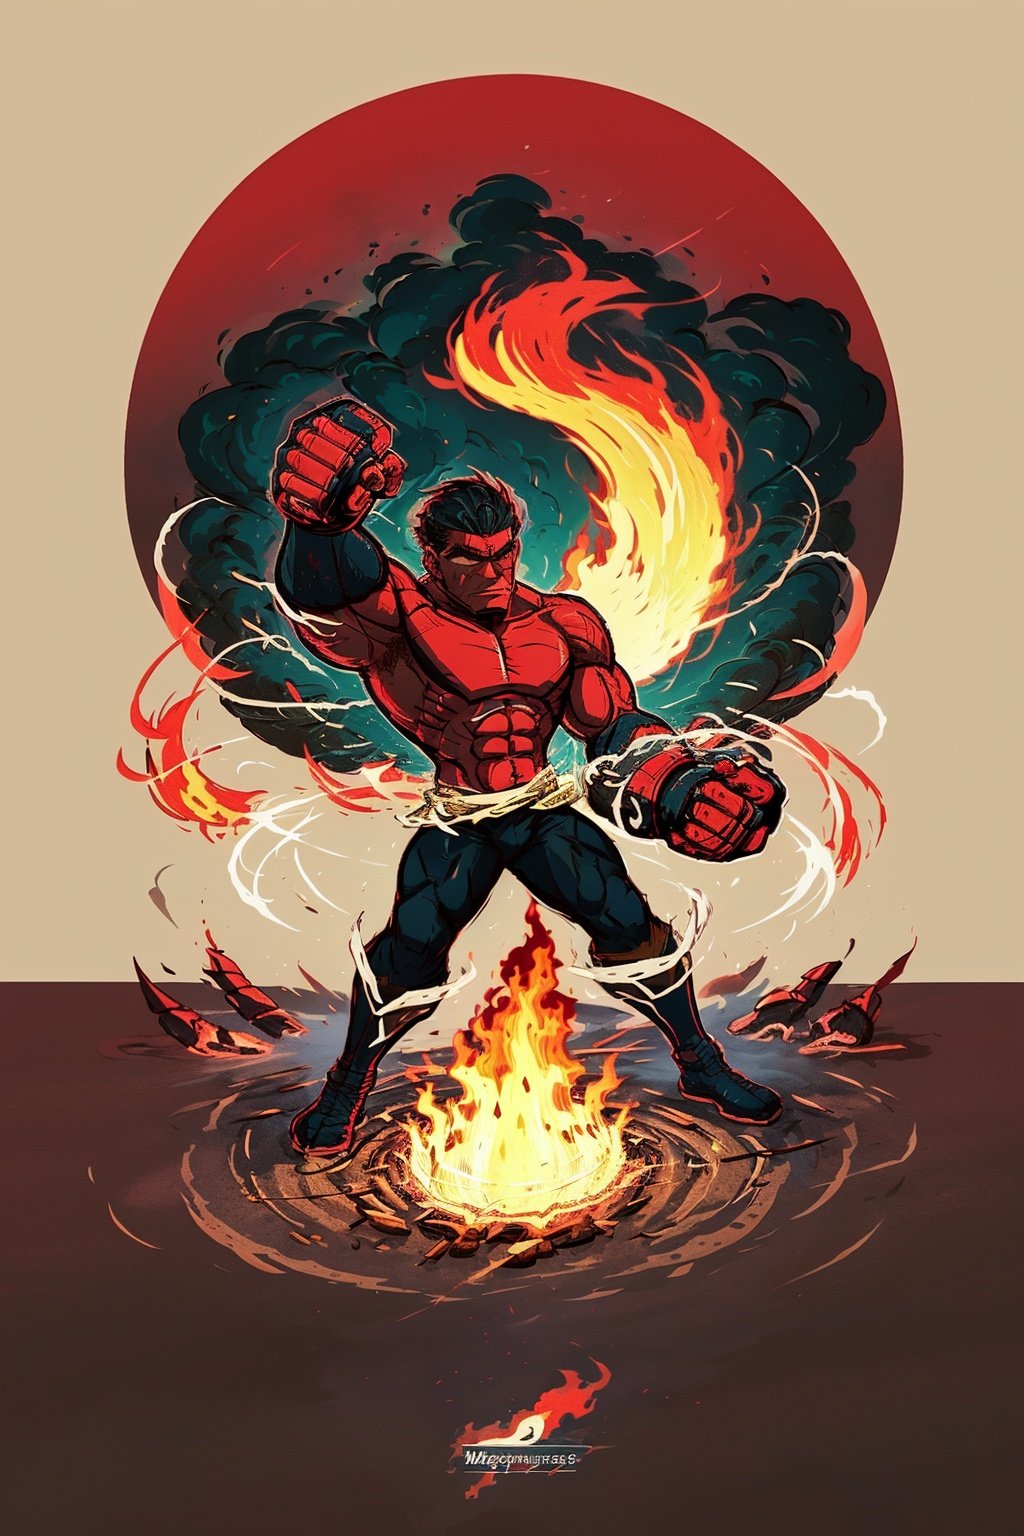 (masterpiece, best quality:1.5)<lora:EpicLogo-000008:0.8>, EpicLogo, Craft an image in an anime fantasy world style, depicting a lithe, muscular man with his fist ablaze in magical fire. Surround the burning fist with swirling black smoke, 